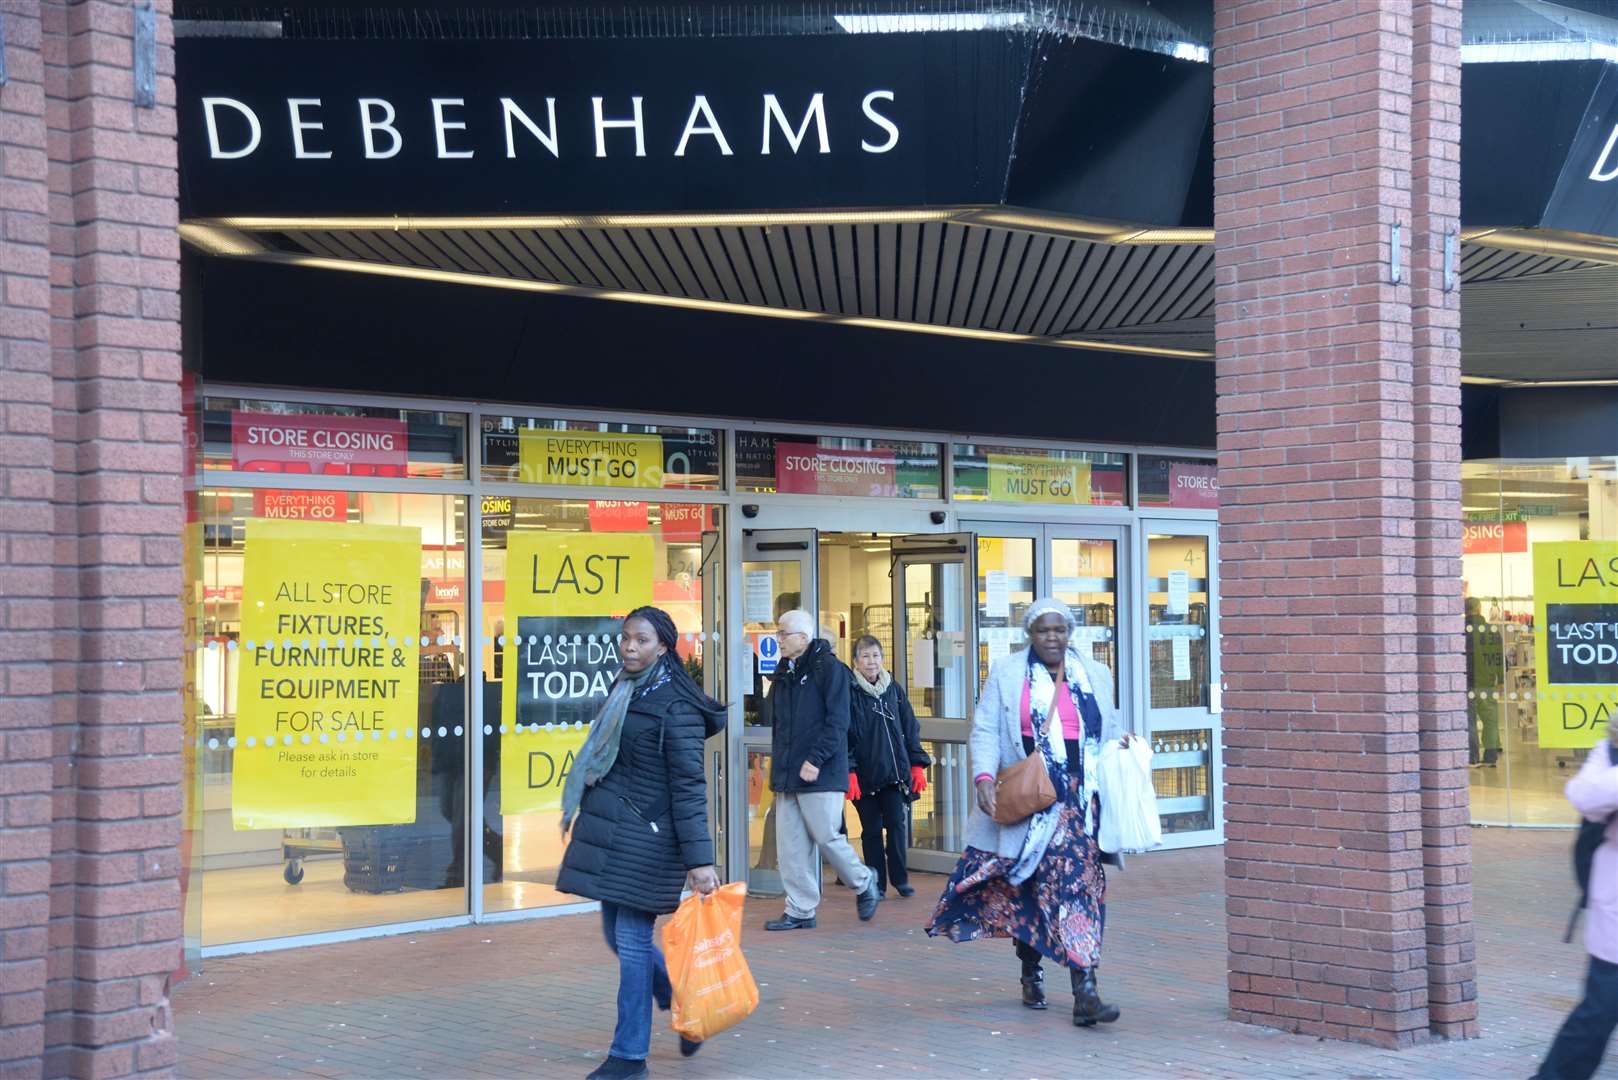 The Debenhams store in Chatham which closed in January last year